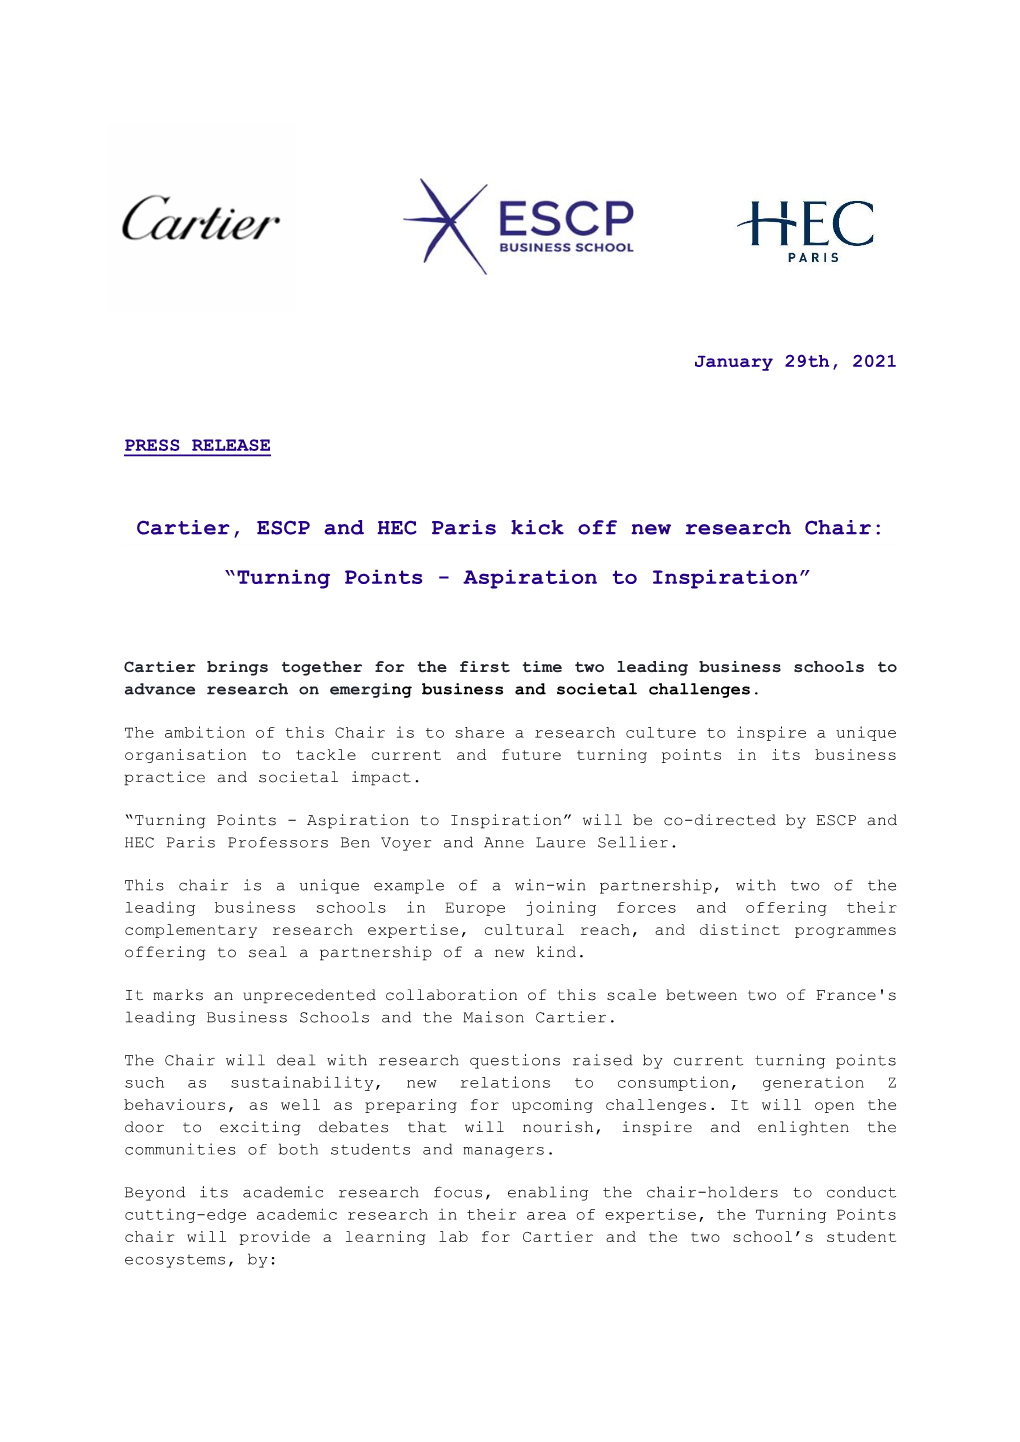 Cartier, ESCP and HEC Paris Kick Off New Research Chair: “Turning